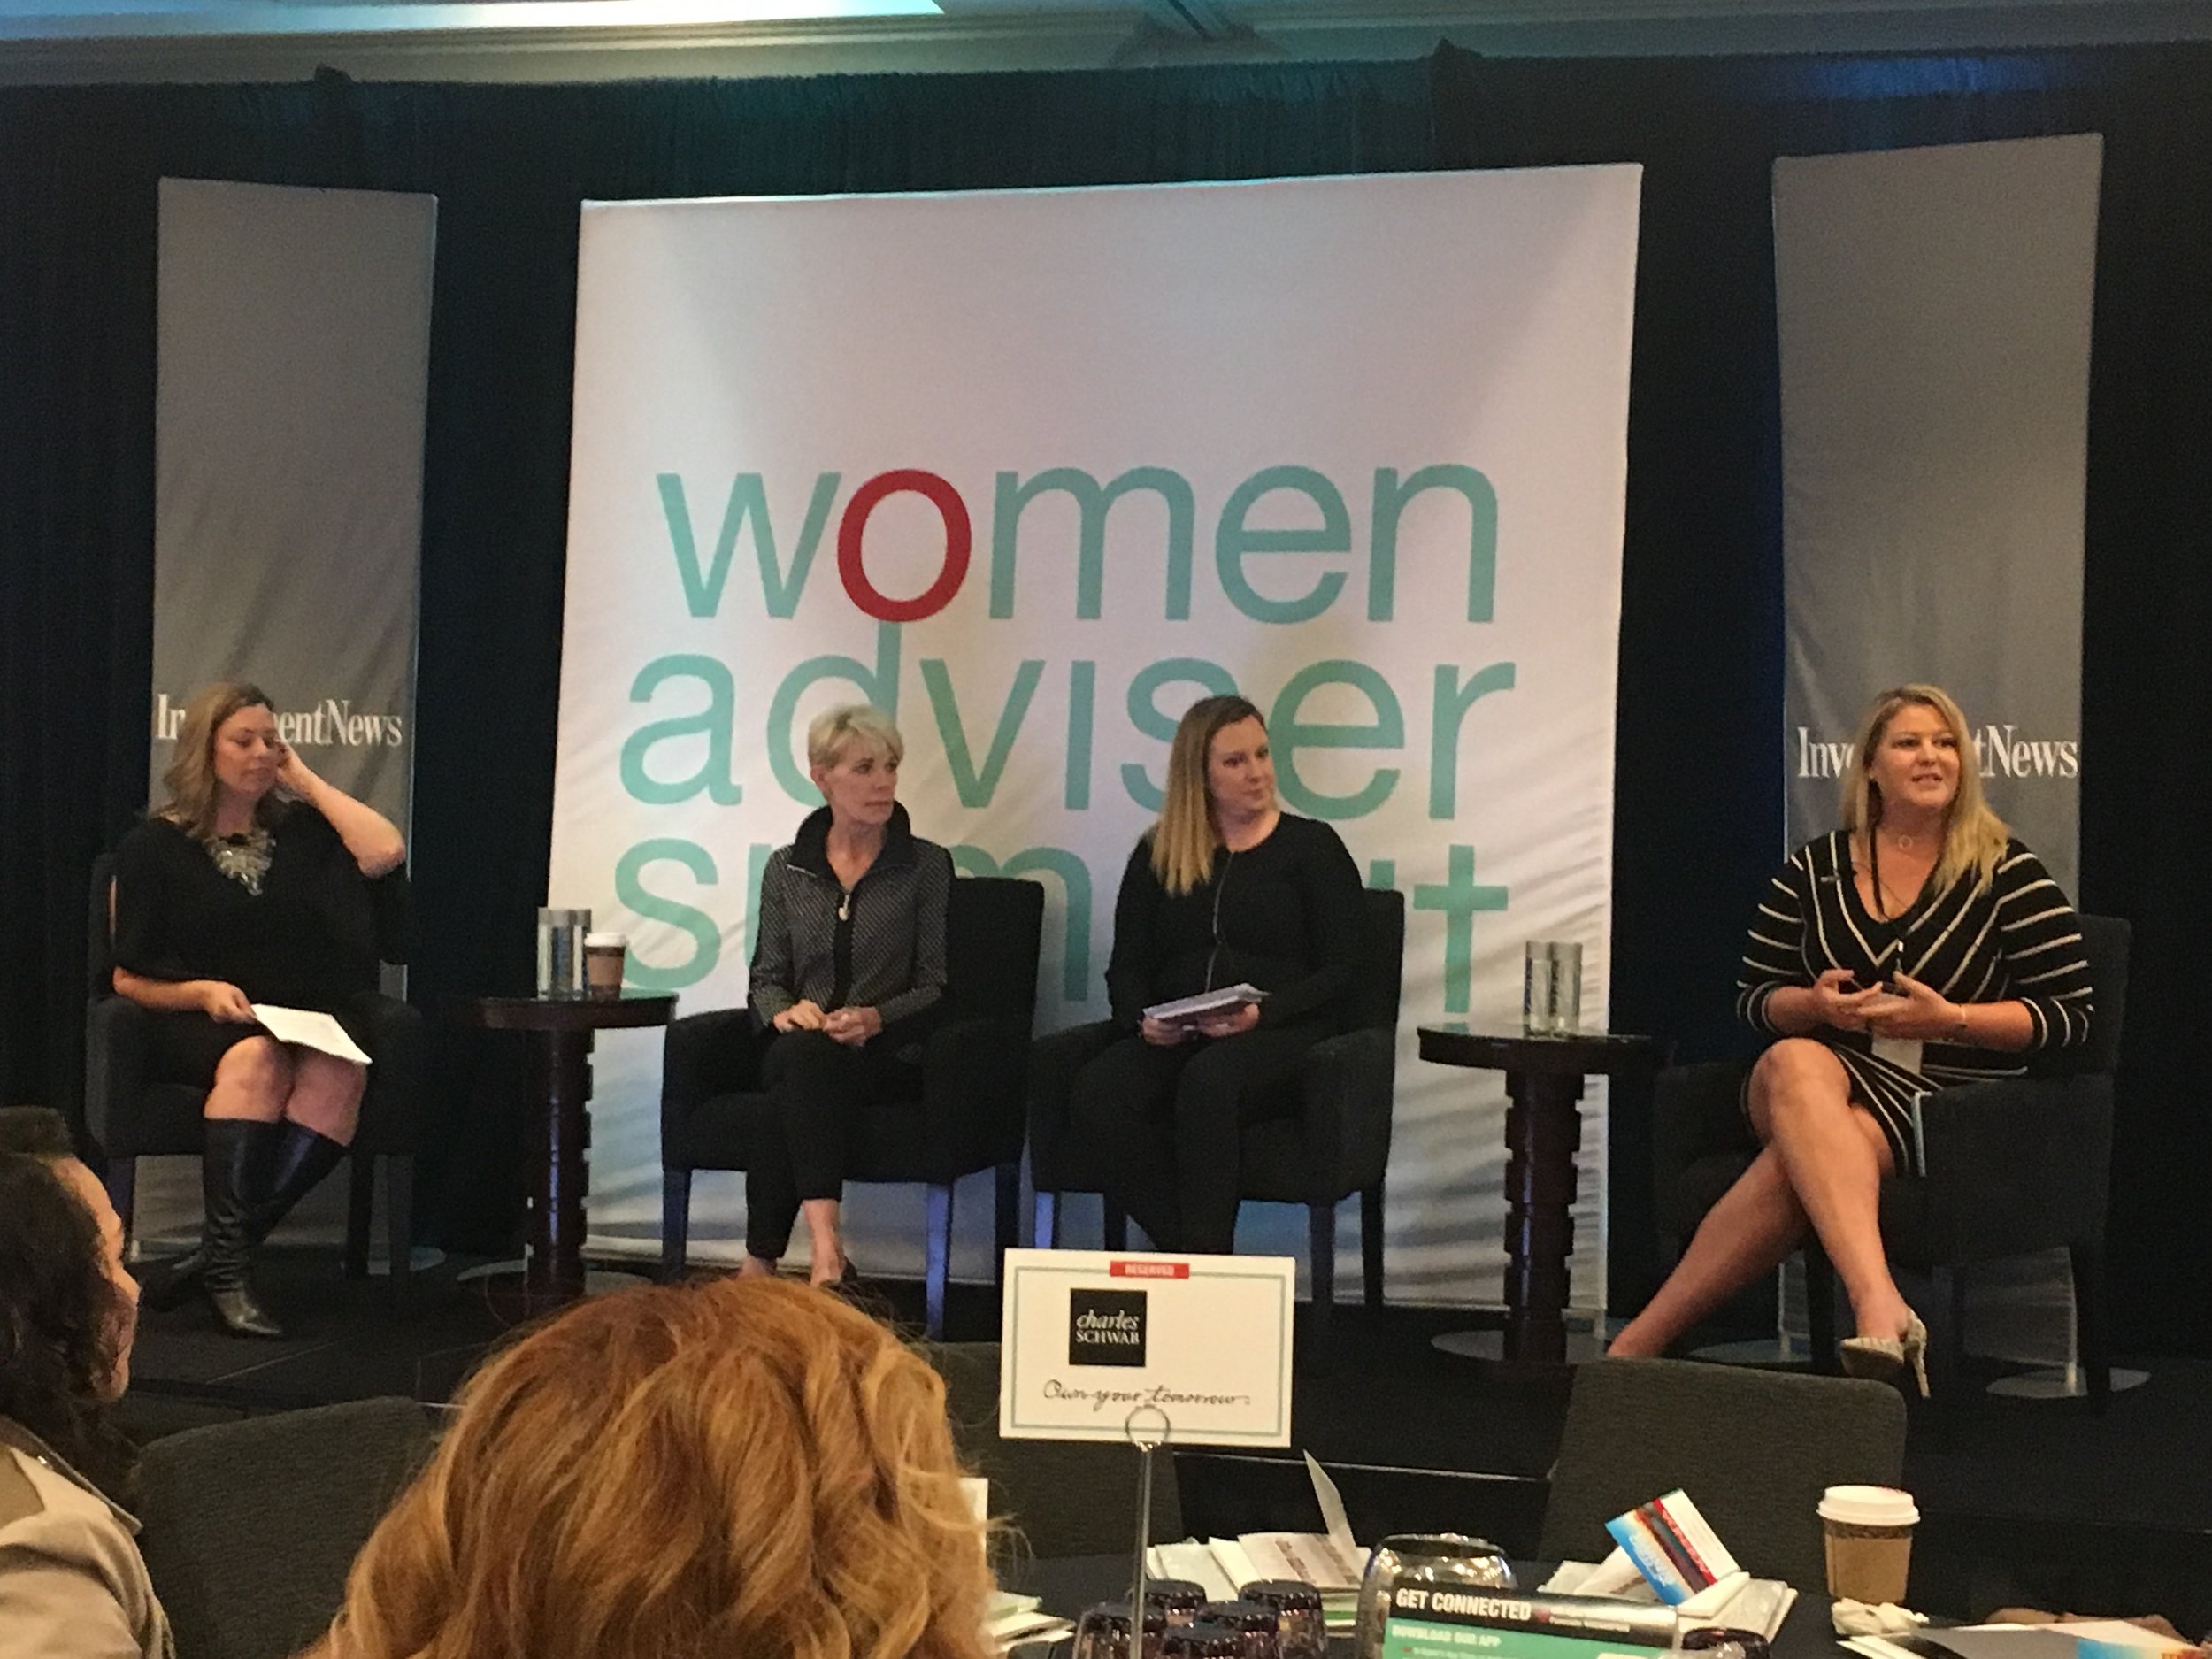  Cofounder of The W Source™ Hannah Buschbom (center right) discussing business growth strategies with Theresa Gralinski (left), Joni Youngwirth (center left) and Kristi Straw (right) at the InvestmentNews Women Adviser Summit in San Francisco, CA. 